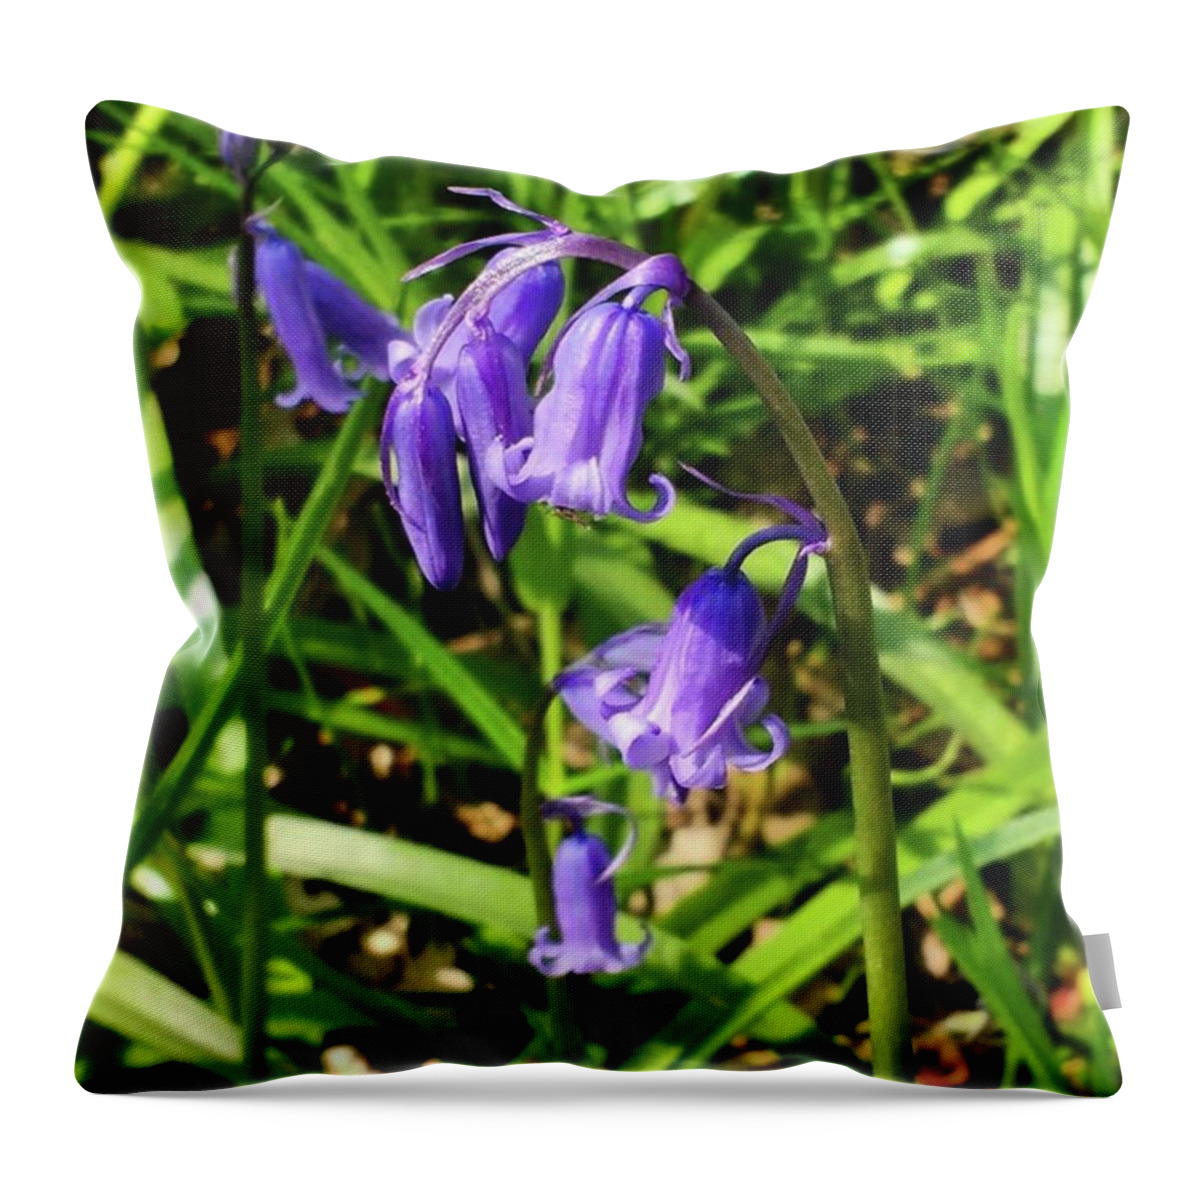  Throw Pillow featuring the photograph What A Lovely Sunny Day Out At Avonmill by Lauren Julia Mckinney